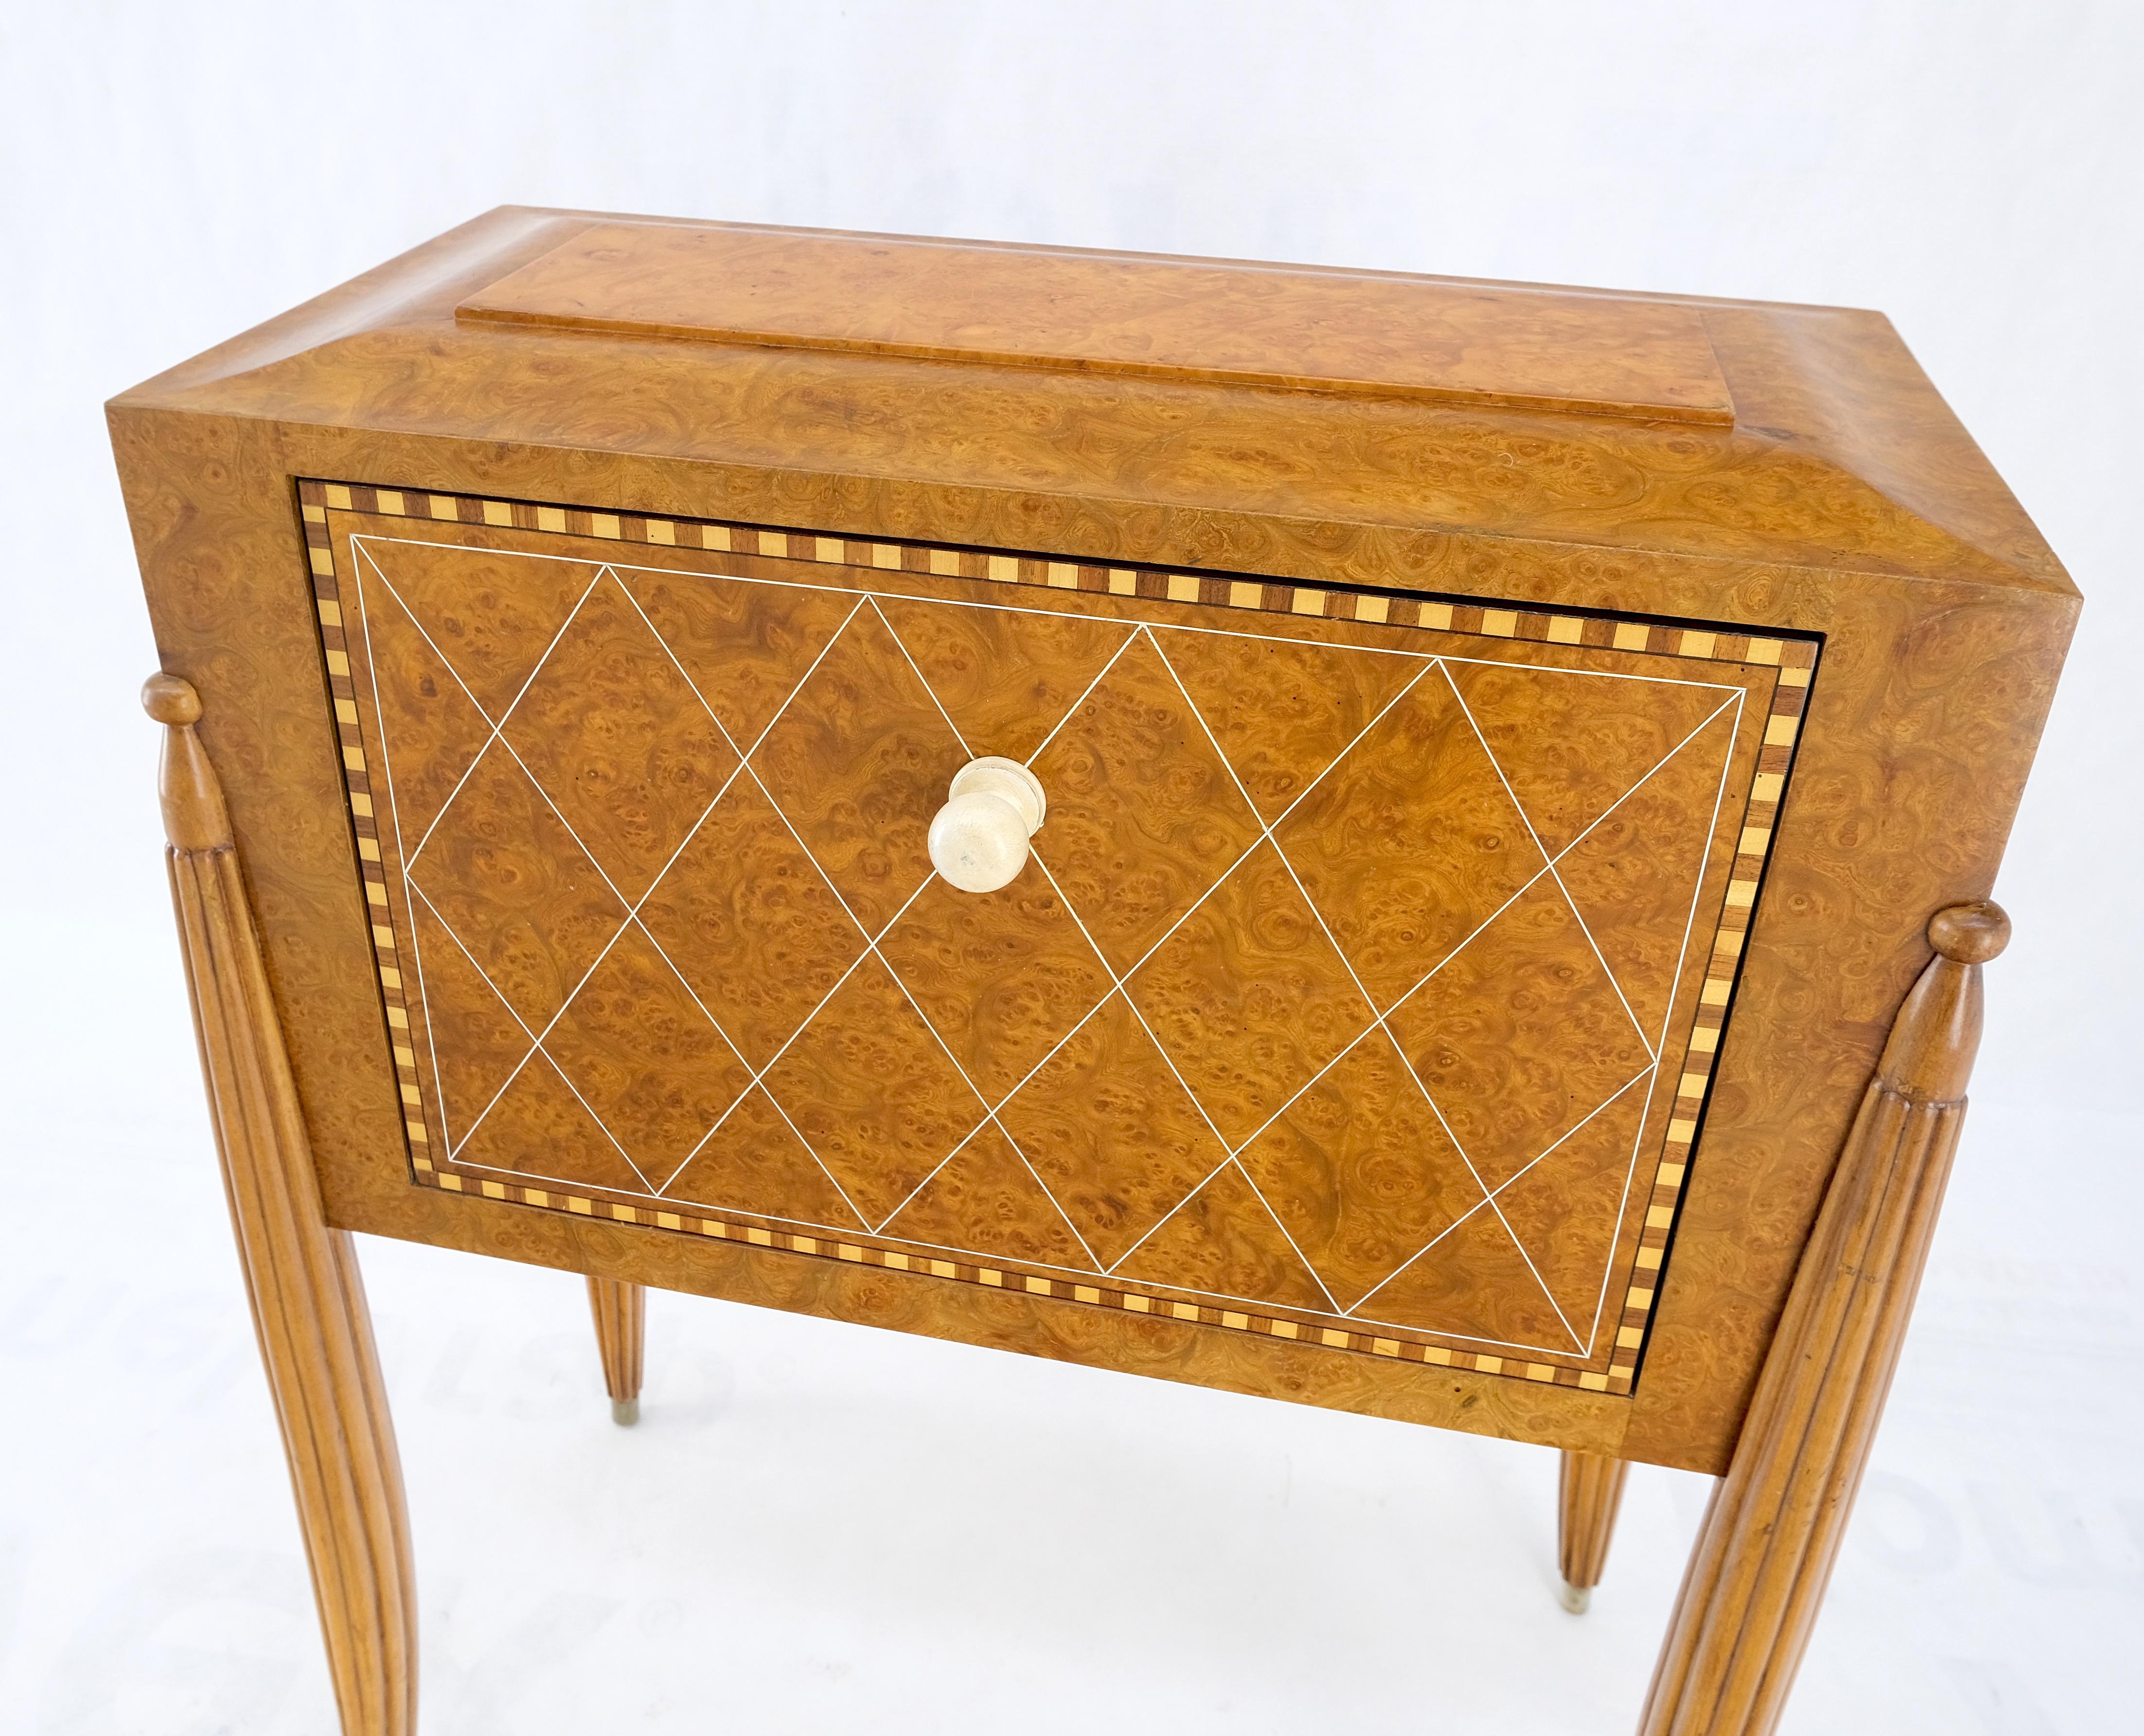 20th Century Art Deco Diamond Inlay Drop Front Burl Wood Stand Side Table Fluted Tapered Leg For Sale